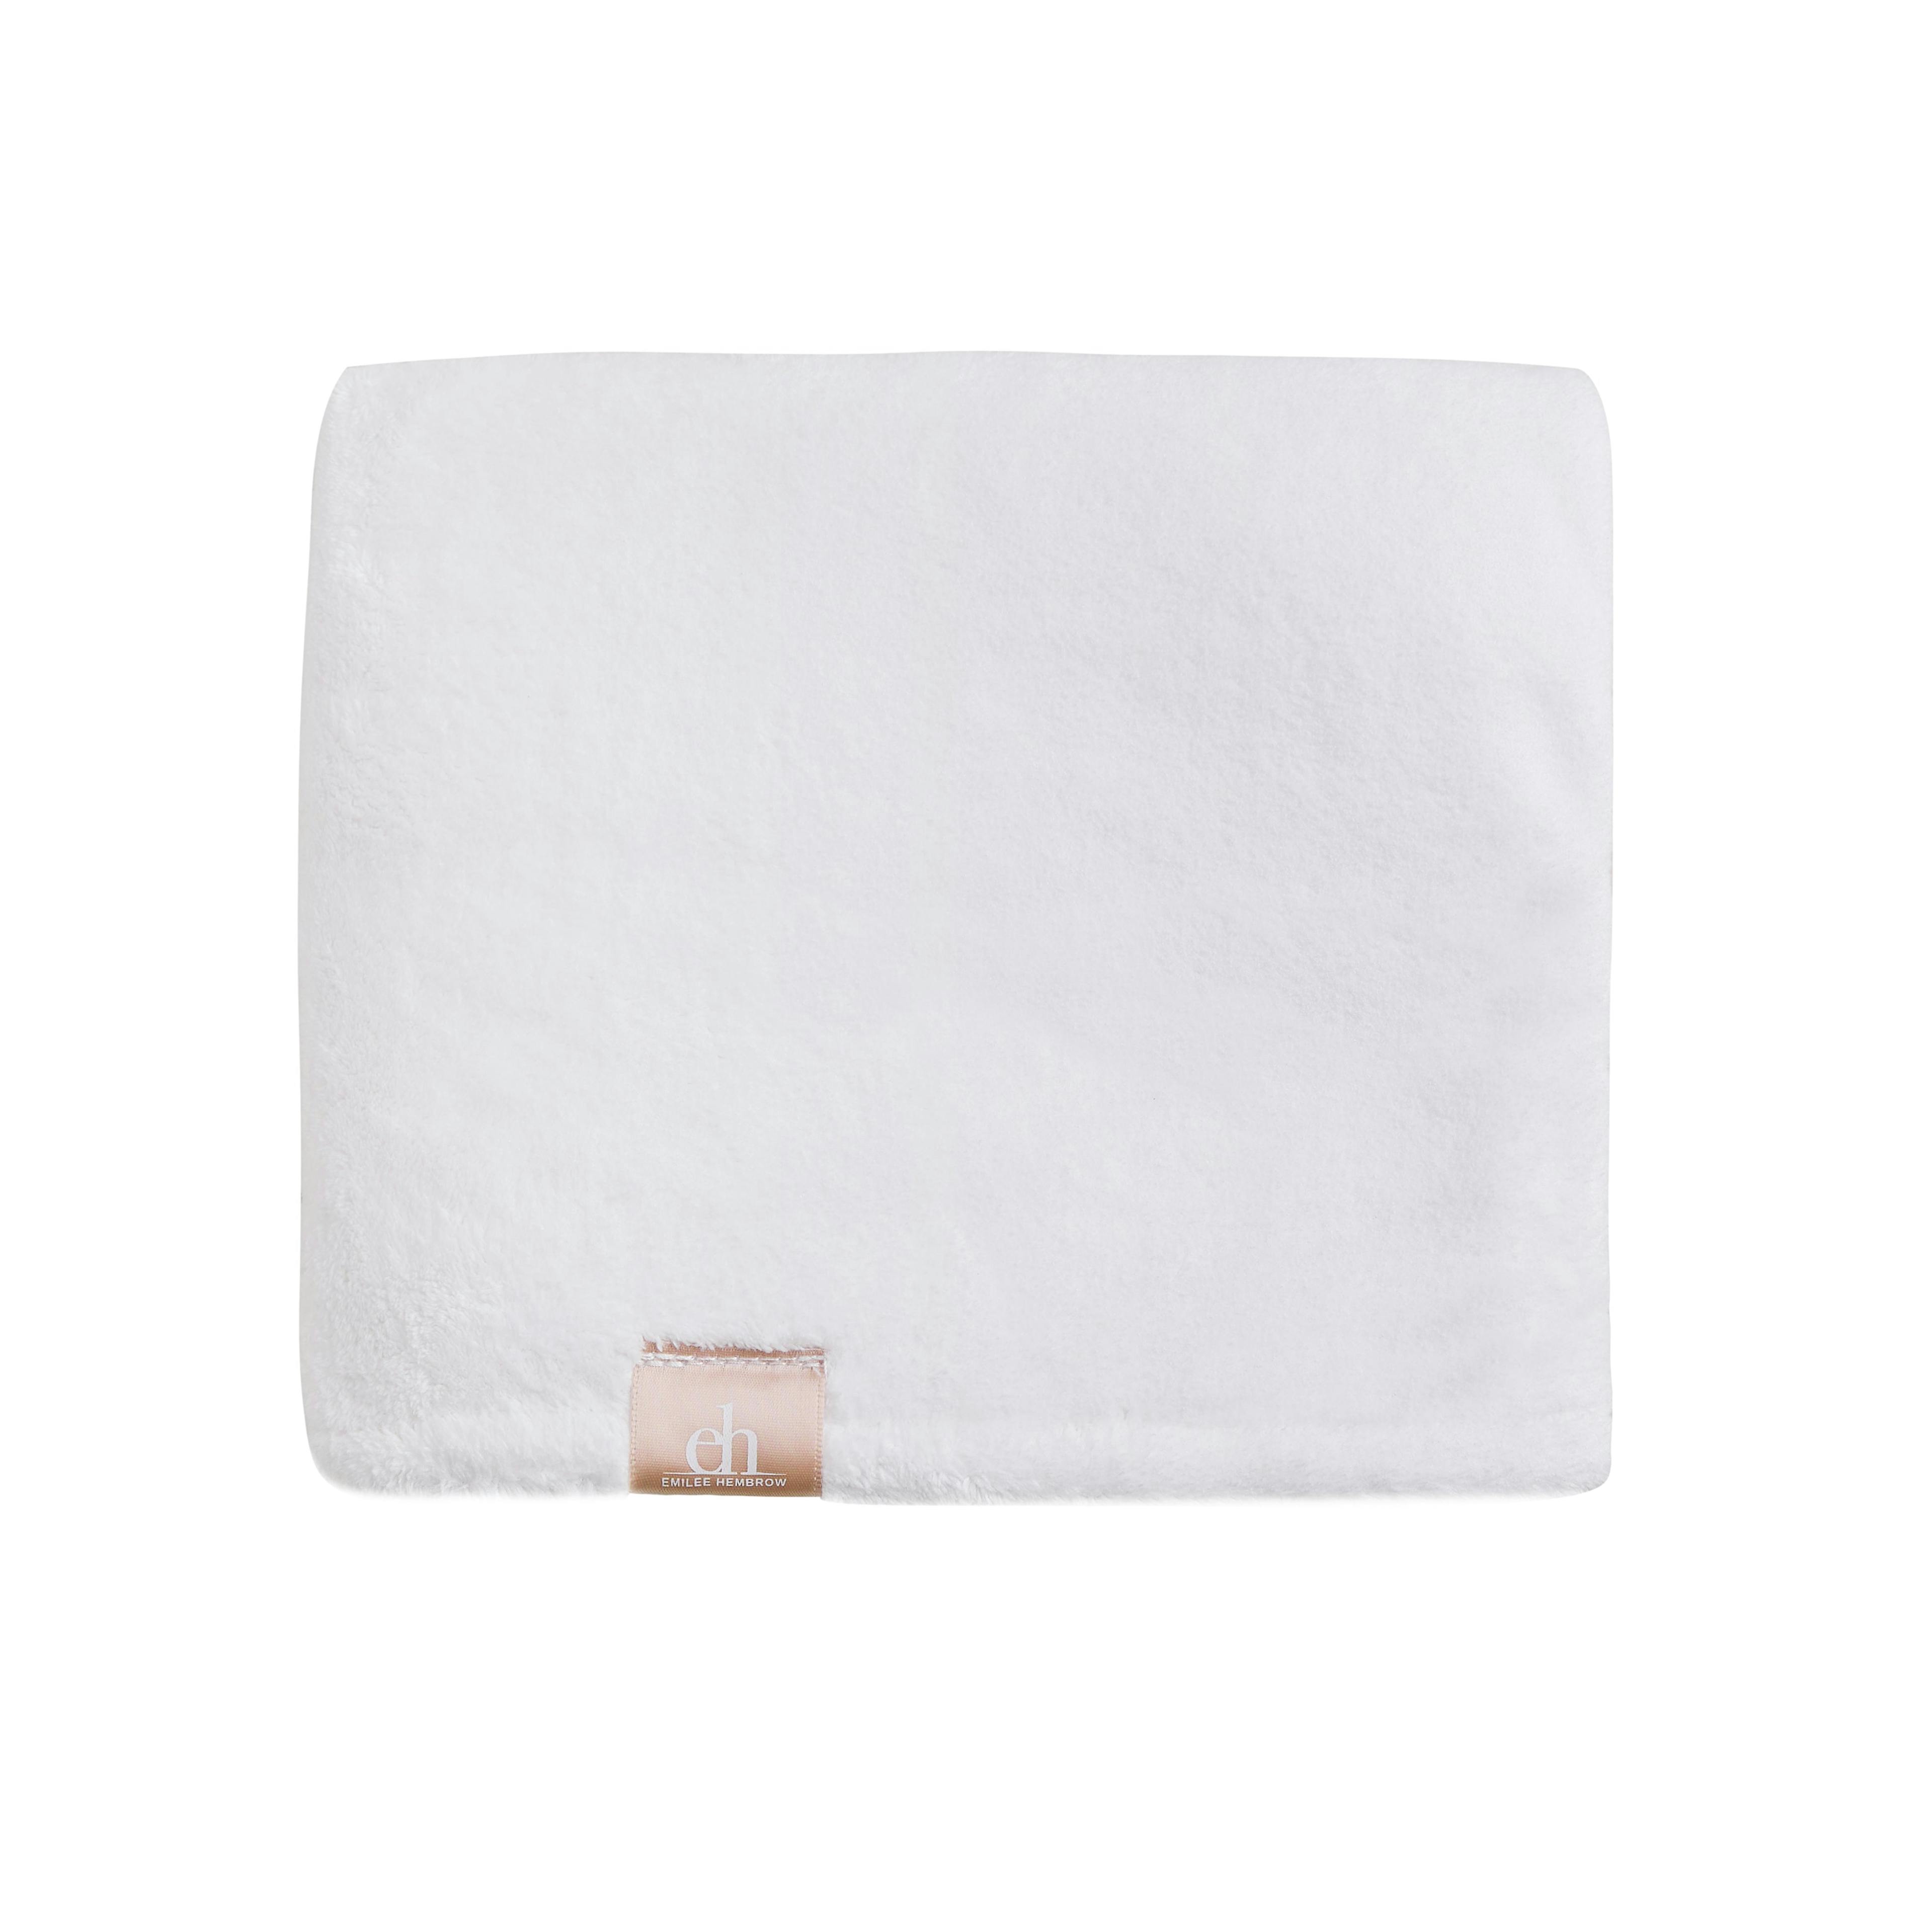 Silk Oil of Morocco x Emilee Hembrow LUXE Microfibre Hair Towel Wrap Argan Infused - White